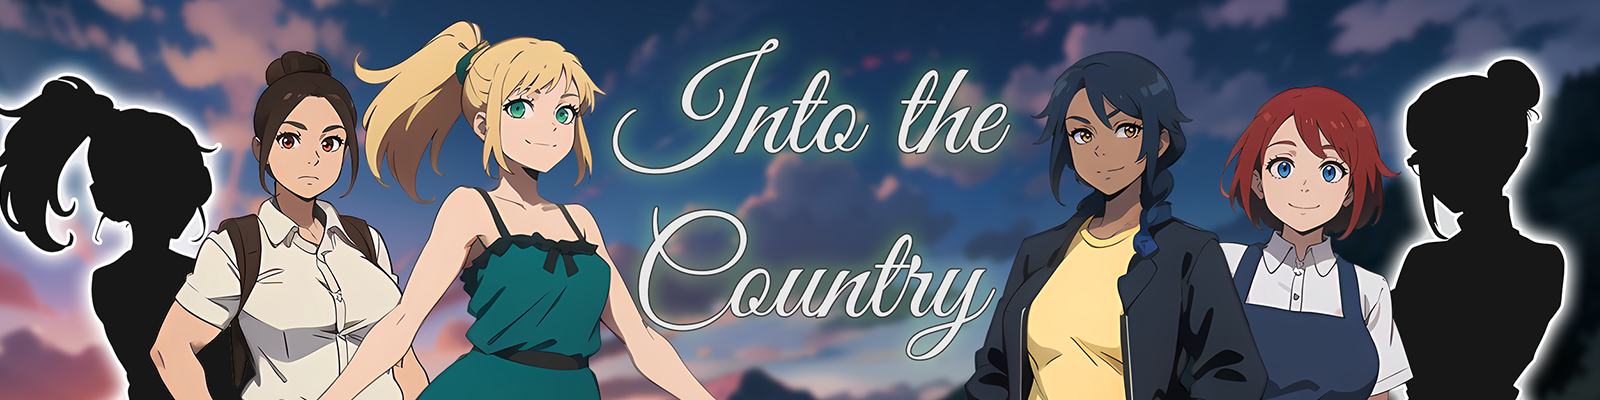 Into the Country1.png